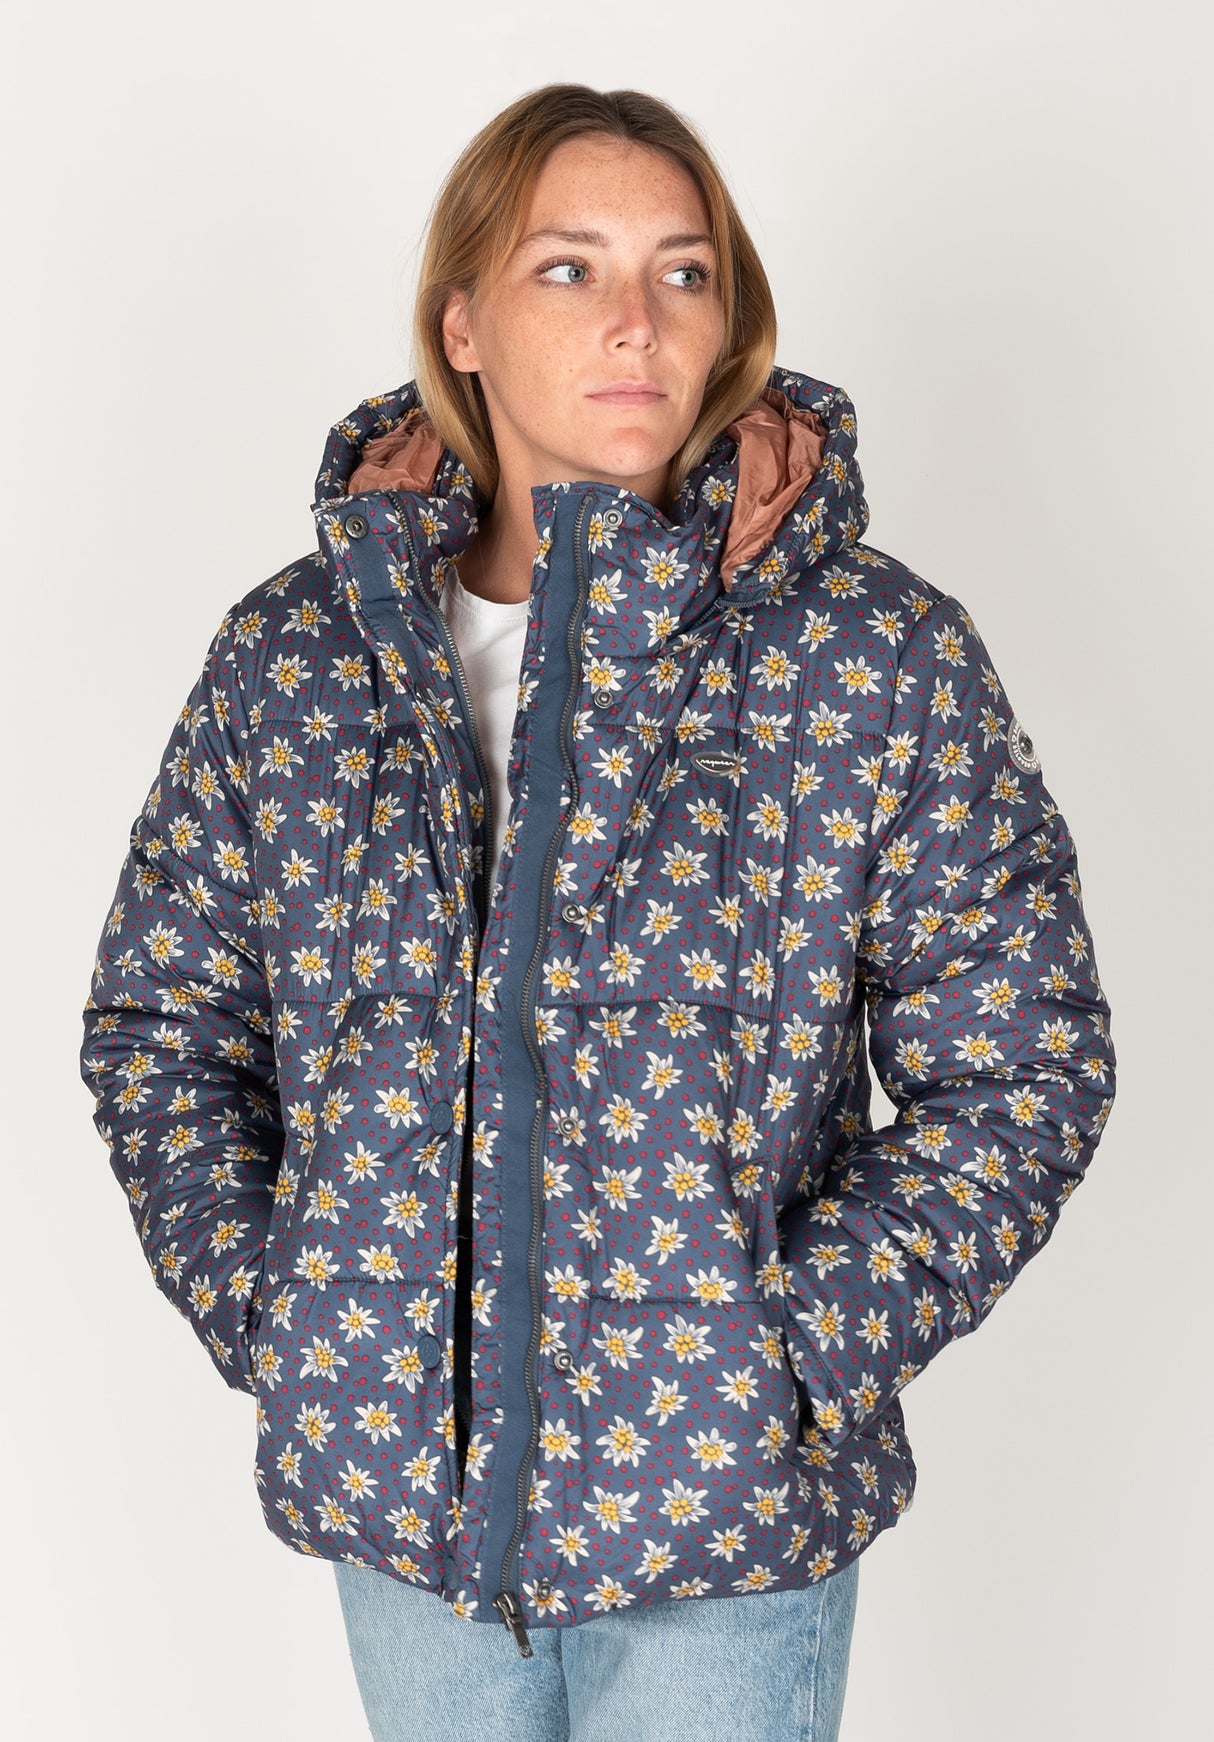 Relive Ragwear Winter Jackets in blue for Women – TITUS